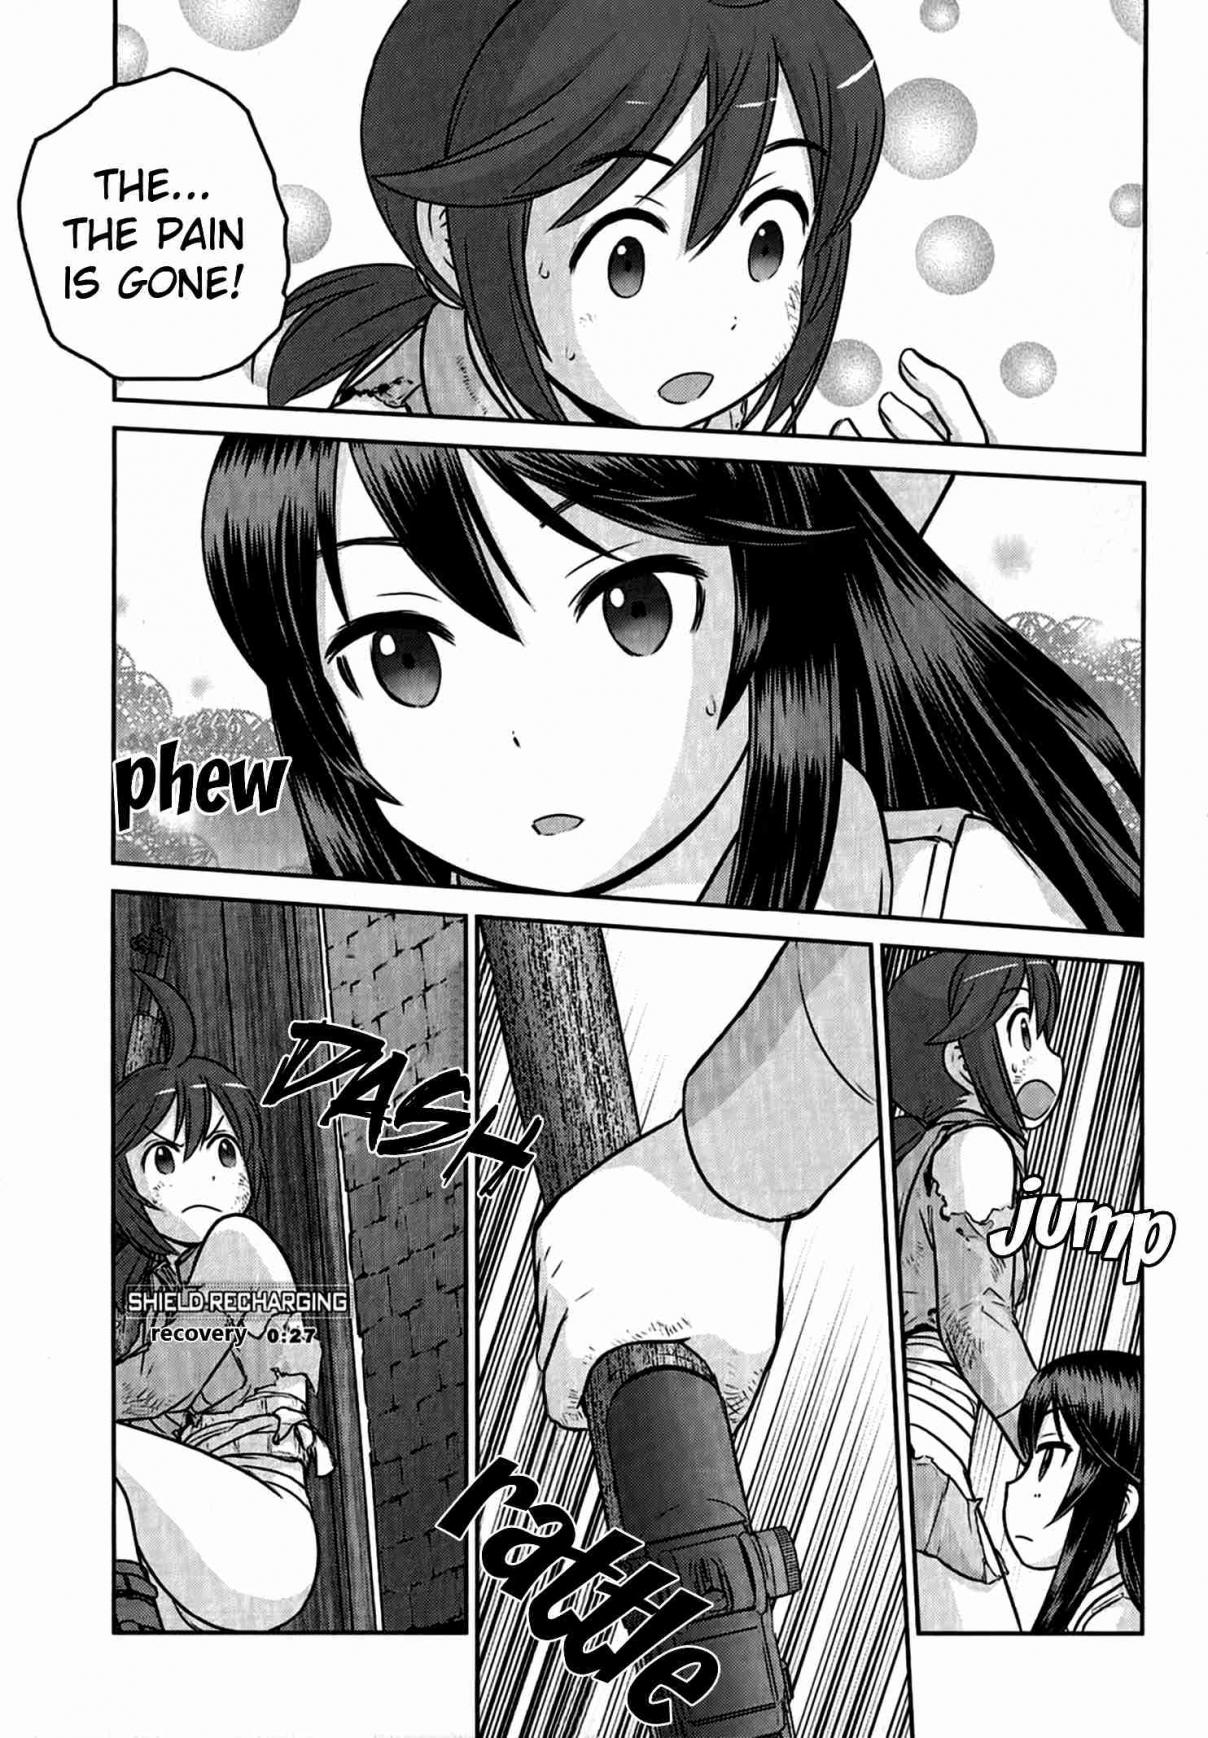 Official Test Manga Vol. 2 Ch. 5 Far Away! The search for the Two girls